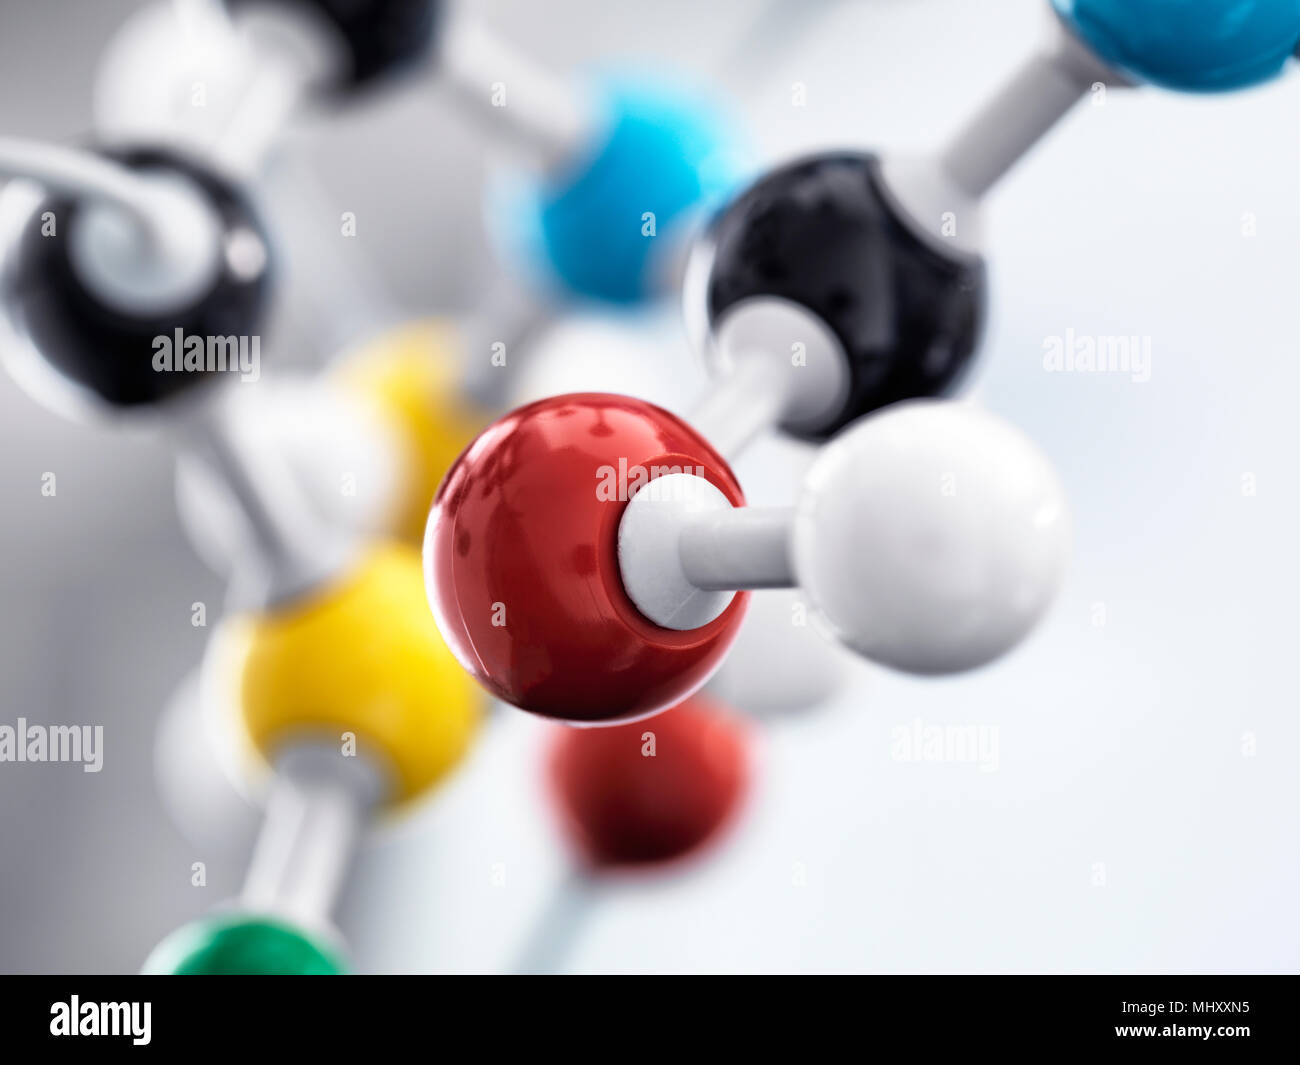 Still life of a ball and stick model illustrating a chemical formula used in research Stock Photo